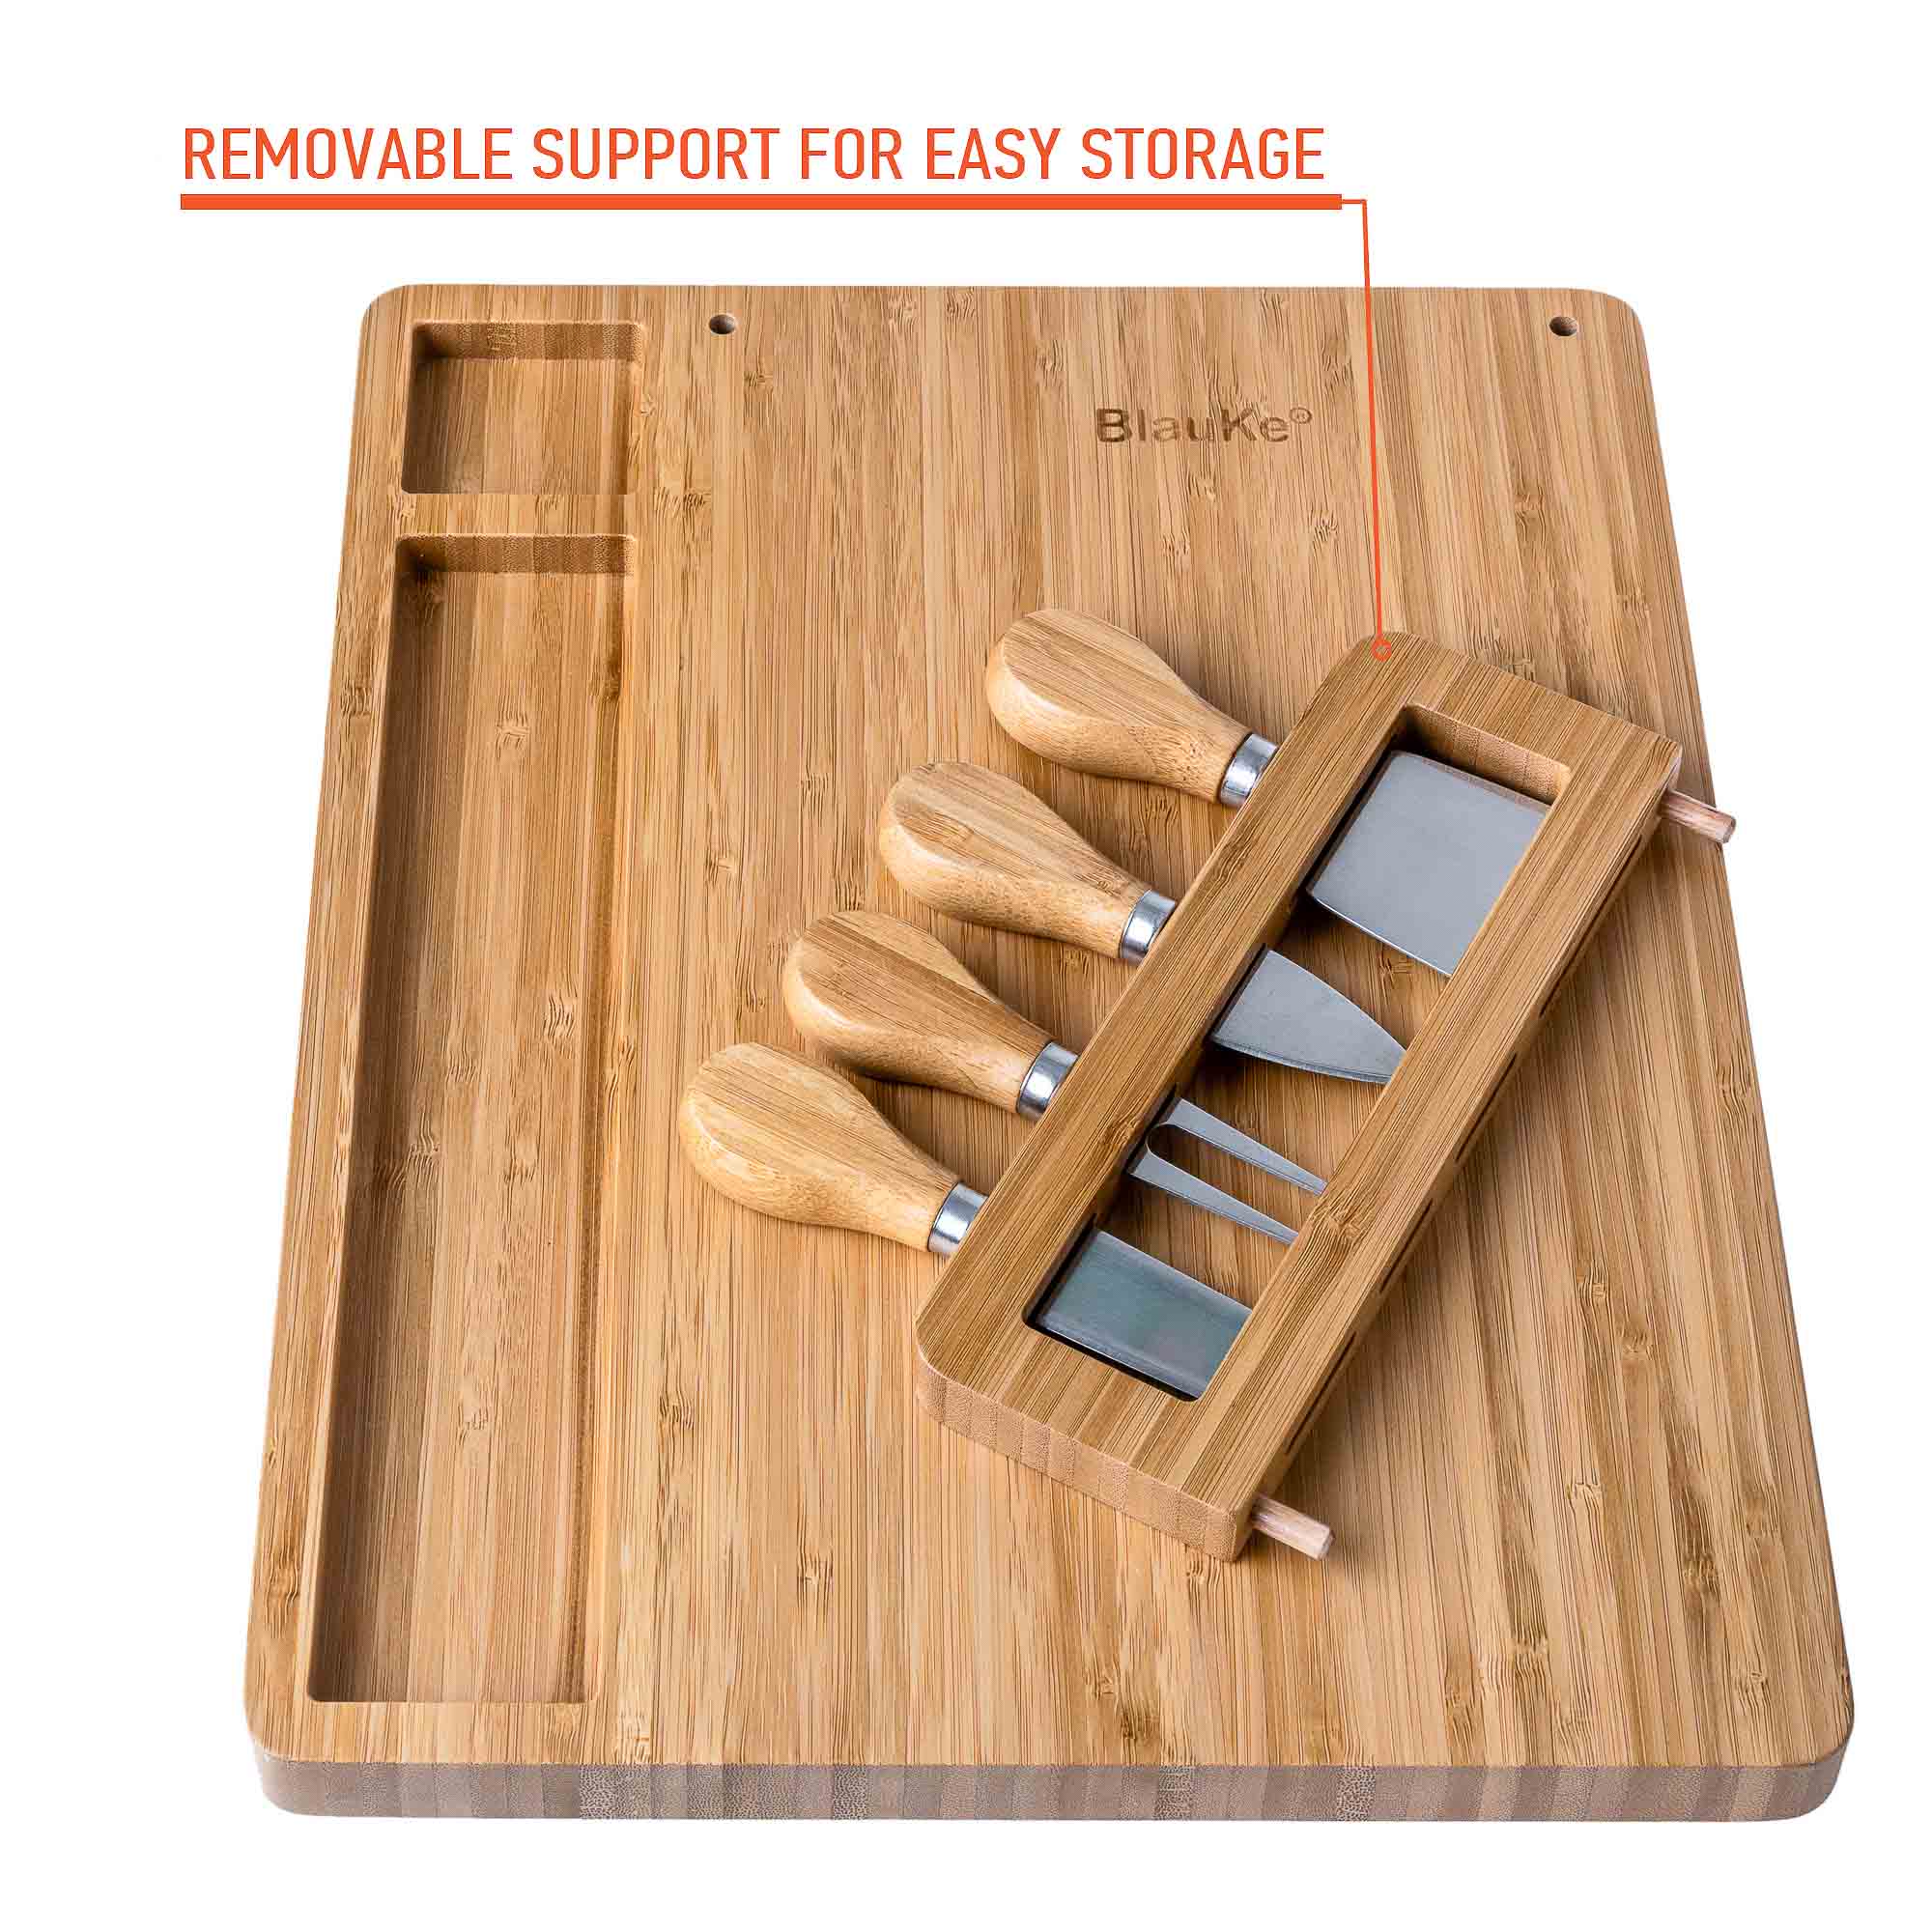 Bamboo Cheese Board and Knife Set - 14x11 inch